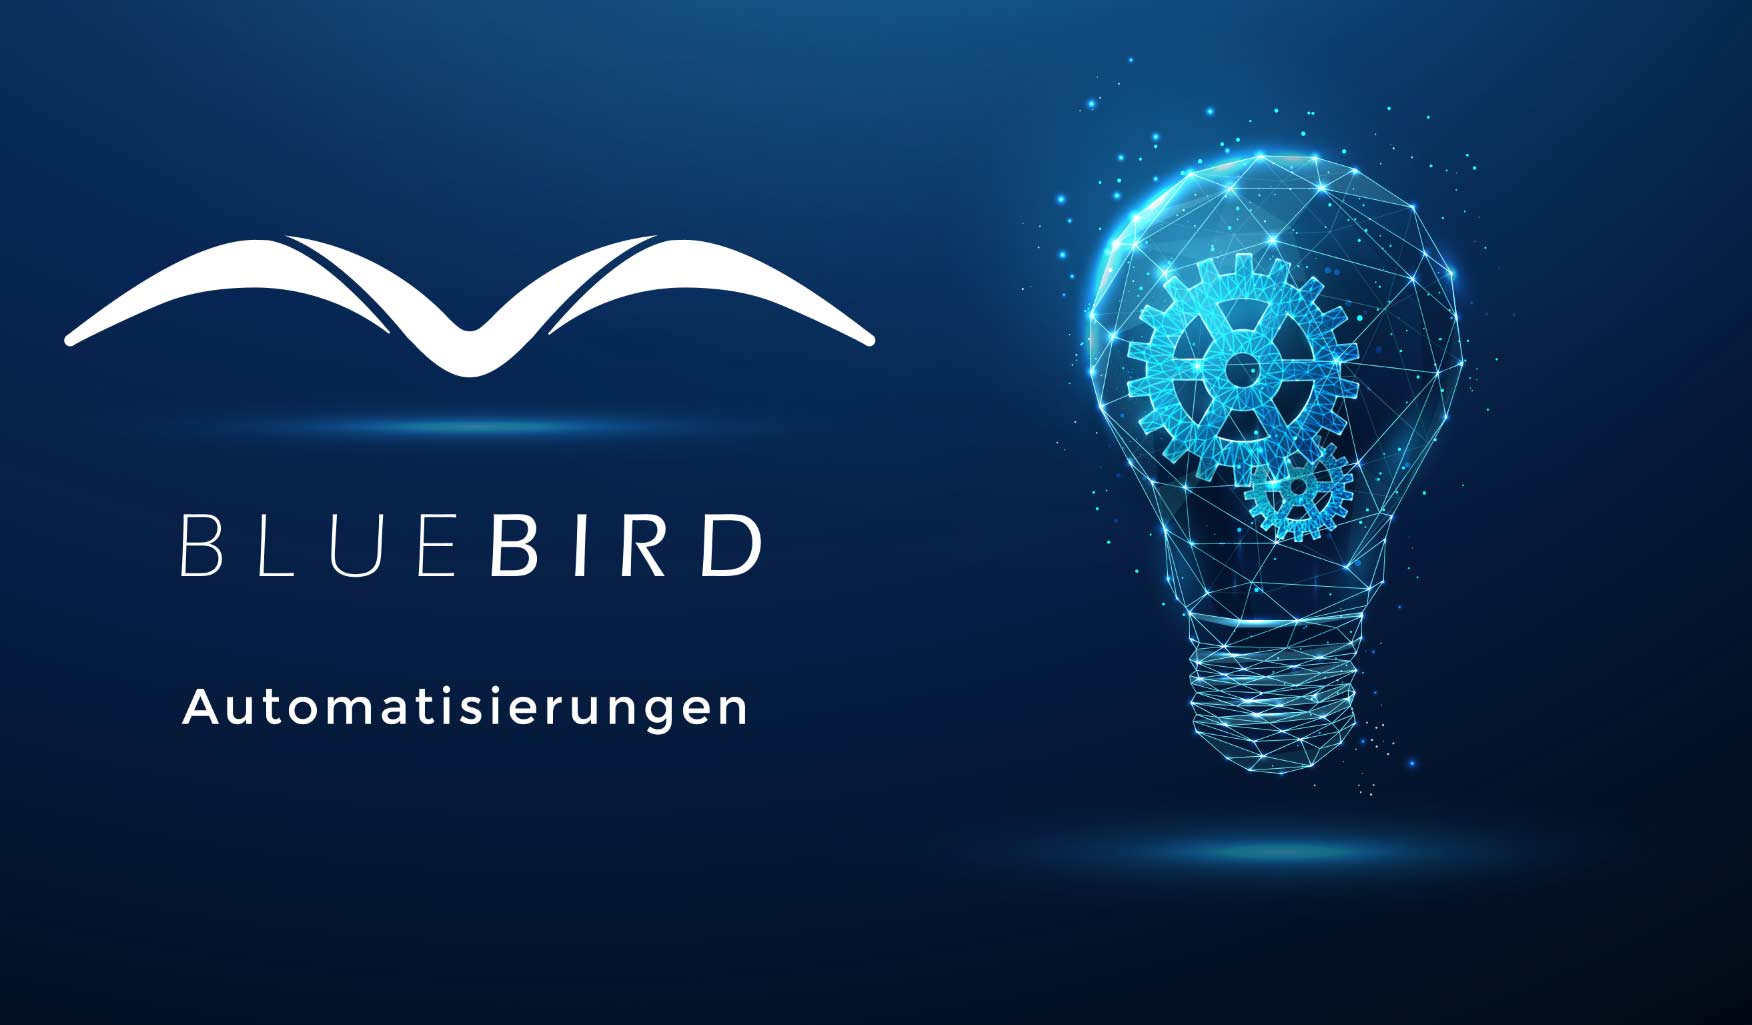 The Bluebird logo with a light bulb in the background.